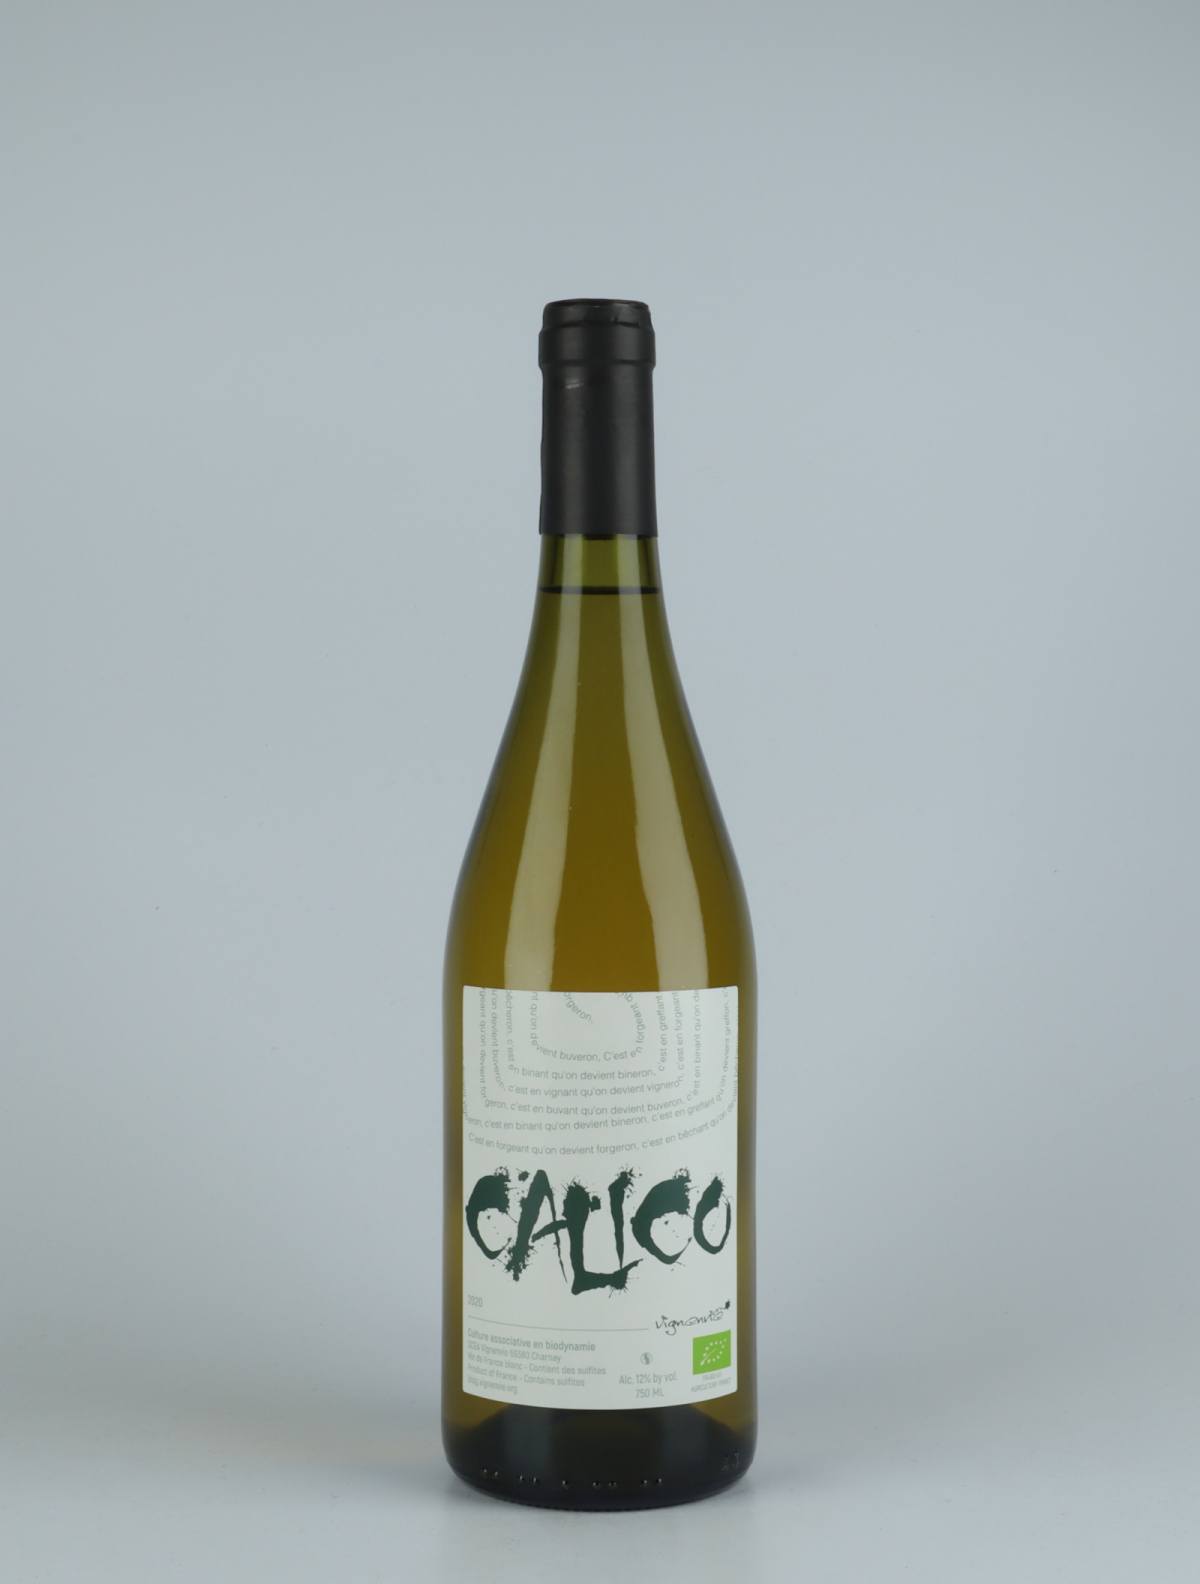 A bottle 2020 Calico White wine from , Beaujolais in France